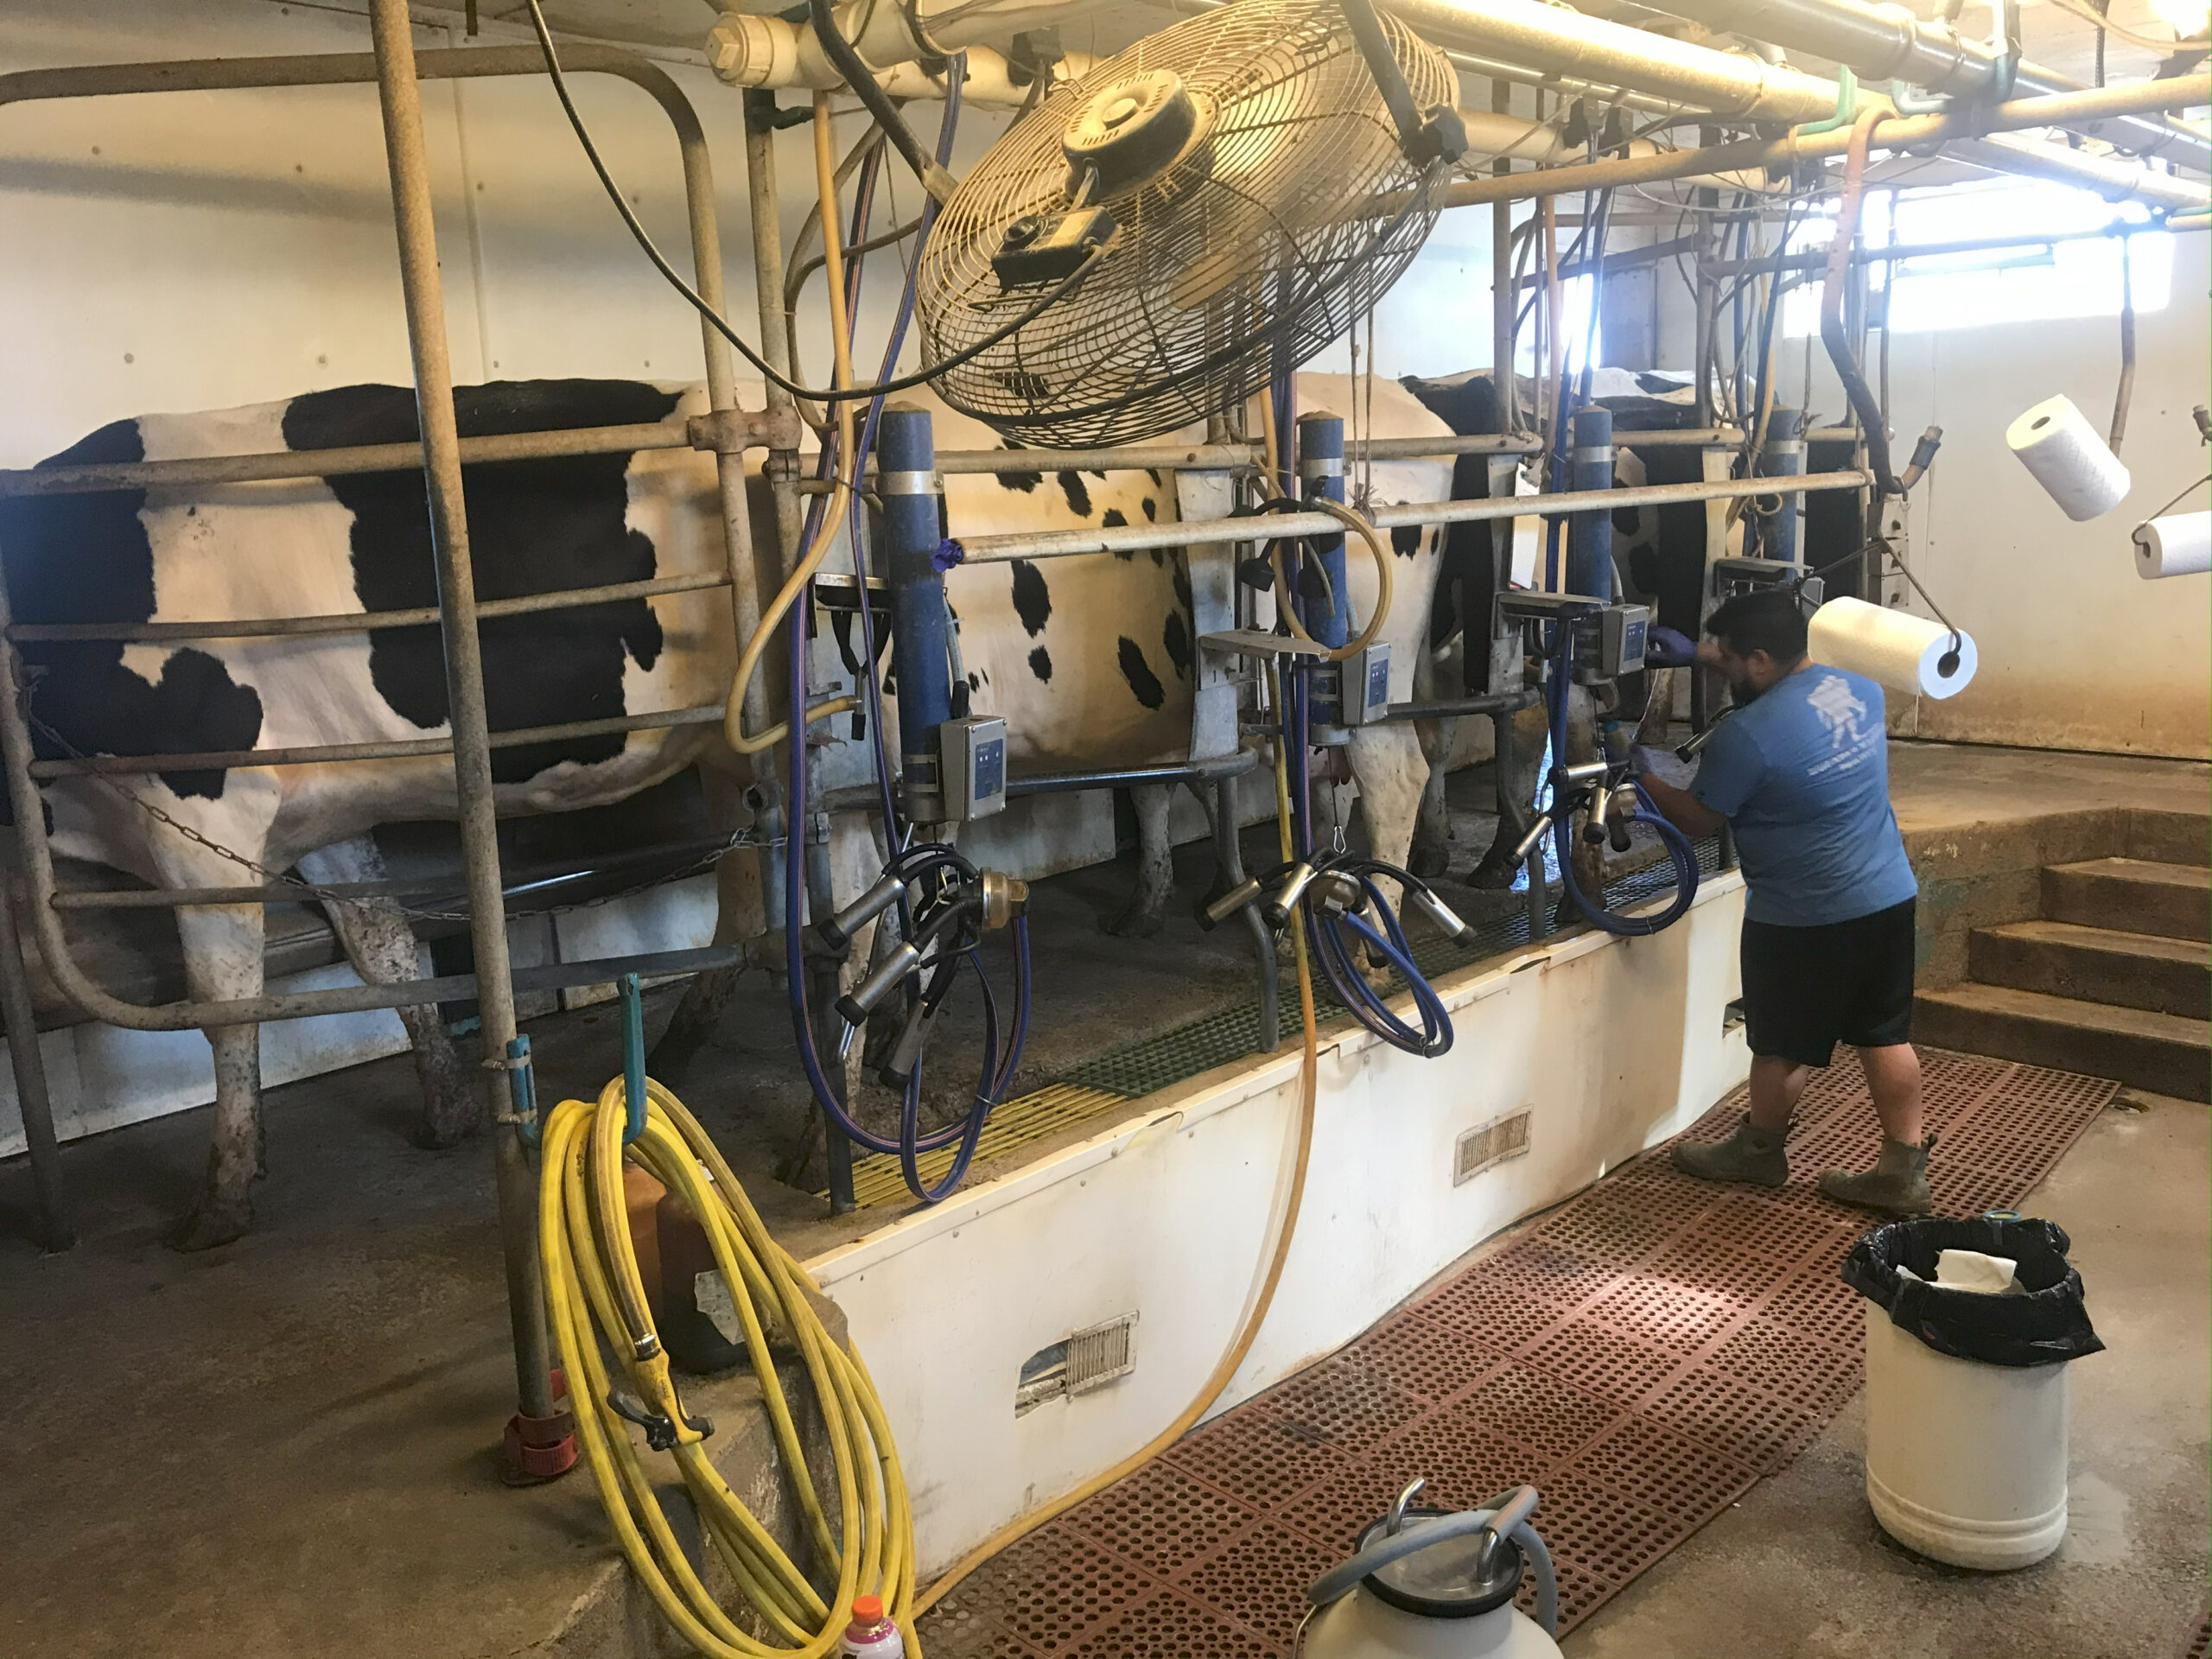 Scheevel Family Farms cows assembled in parlor for milking